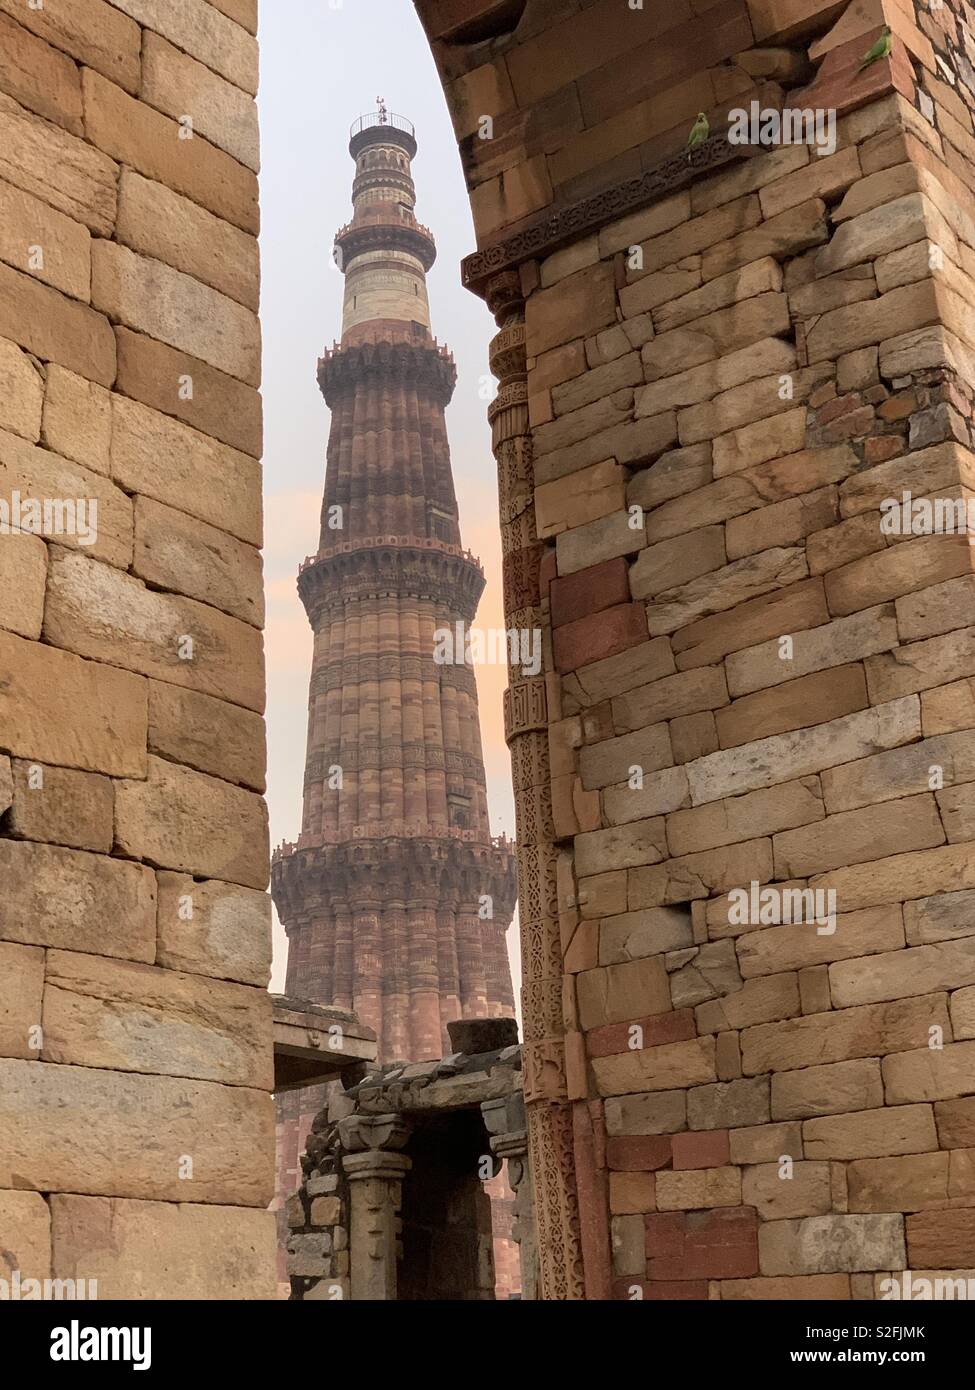 The Qutab Minar in Delhi, India. The minaret forms part of the Qutab complex which is a UNESCO World Heritage Site. Stock Photo